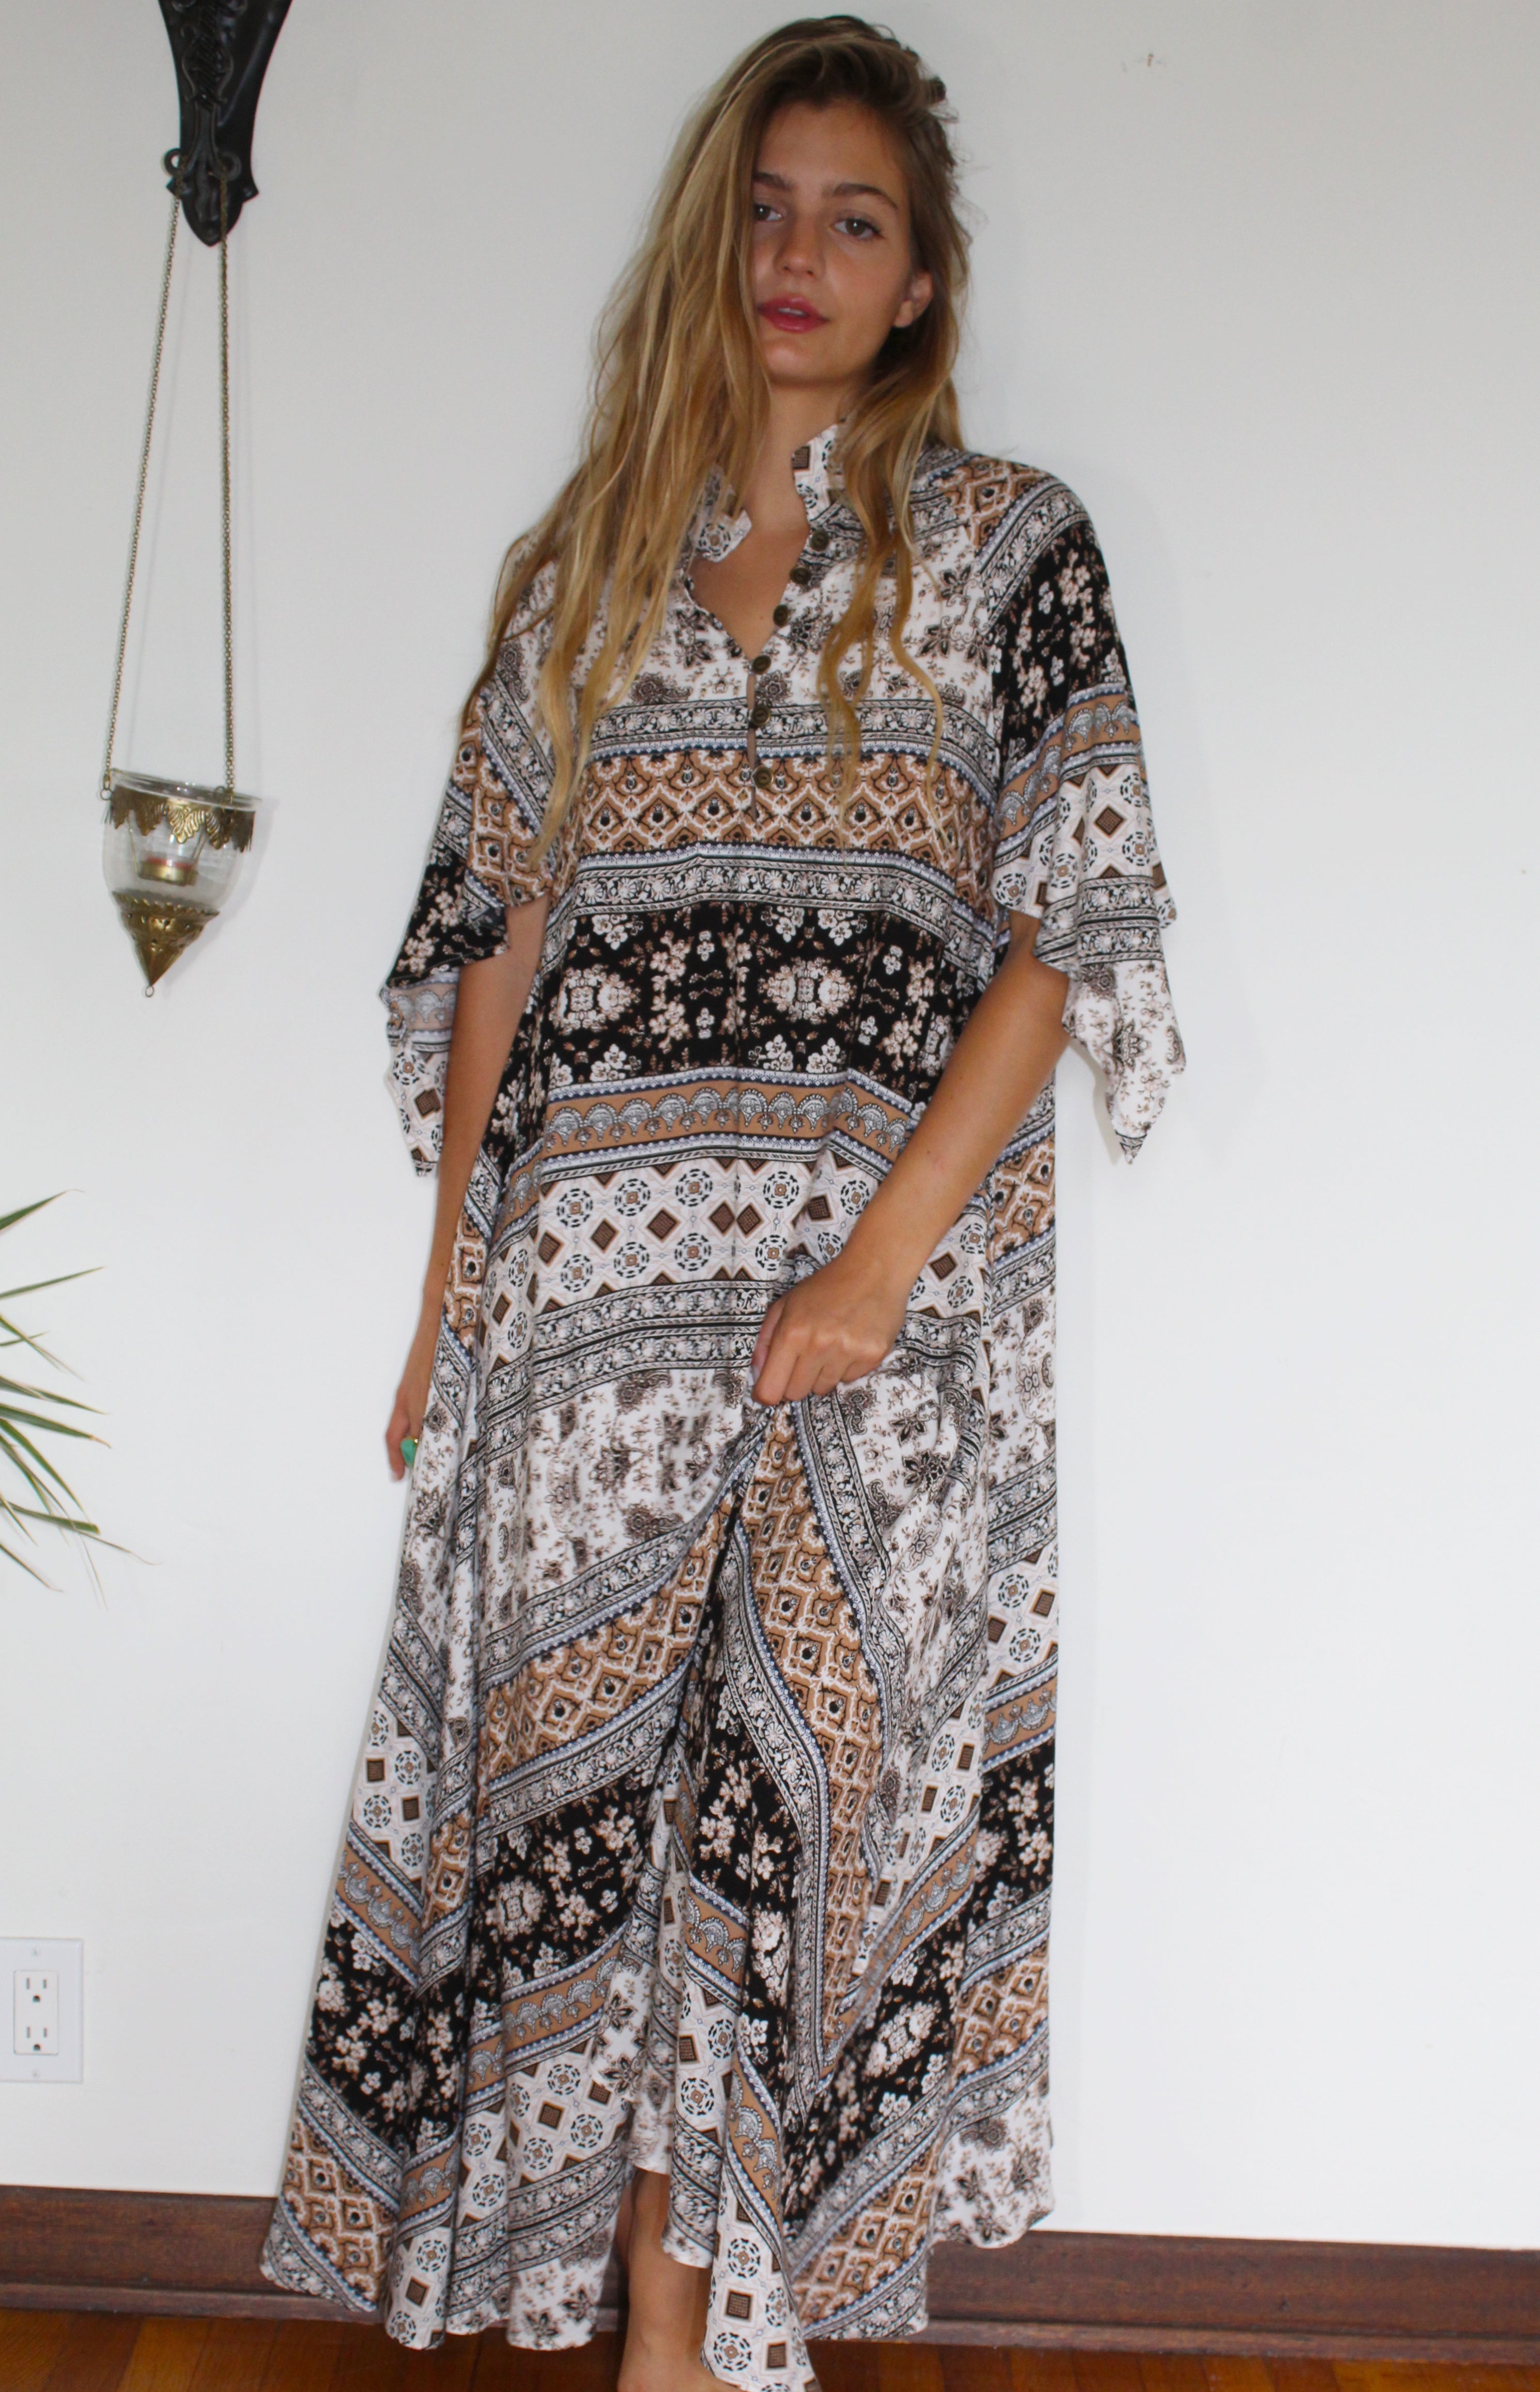 Aloe Earth Prayer Gown - Yoga Clothing by Daughters of Culture